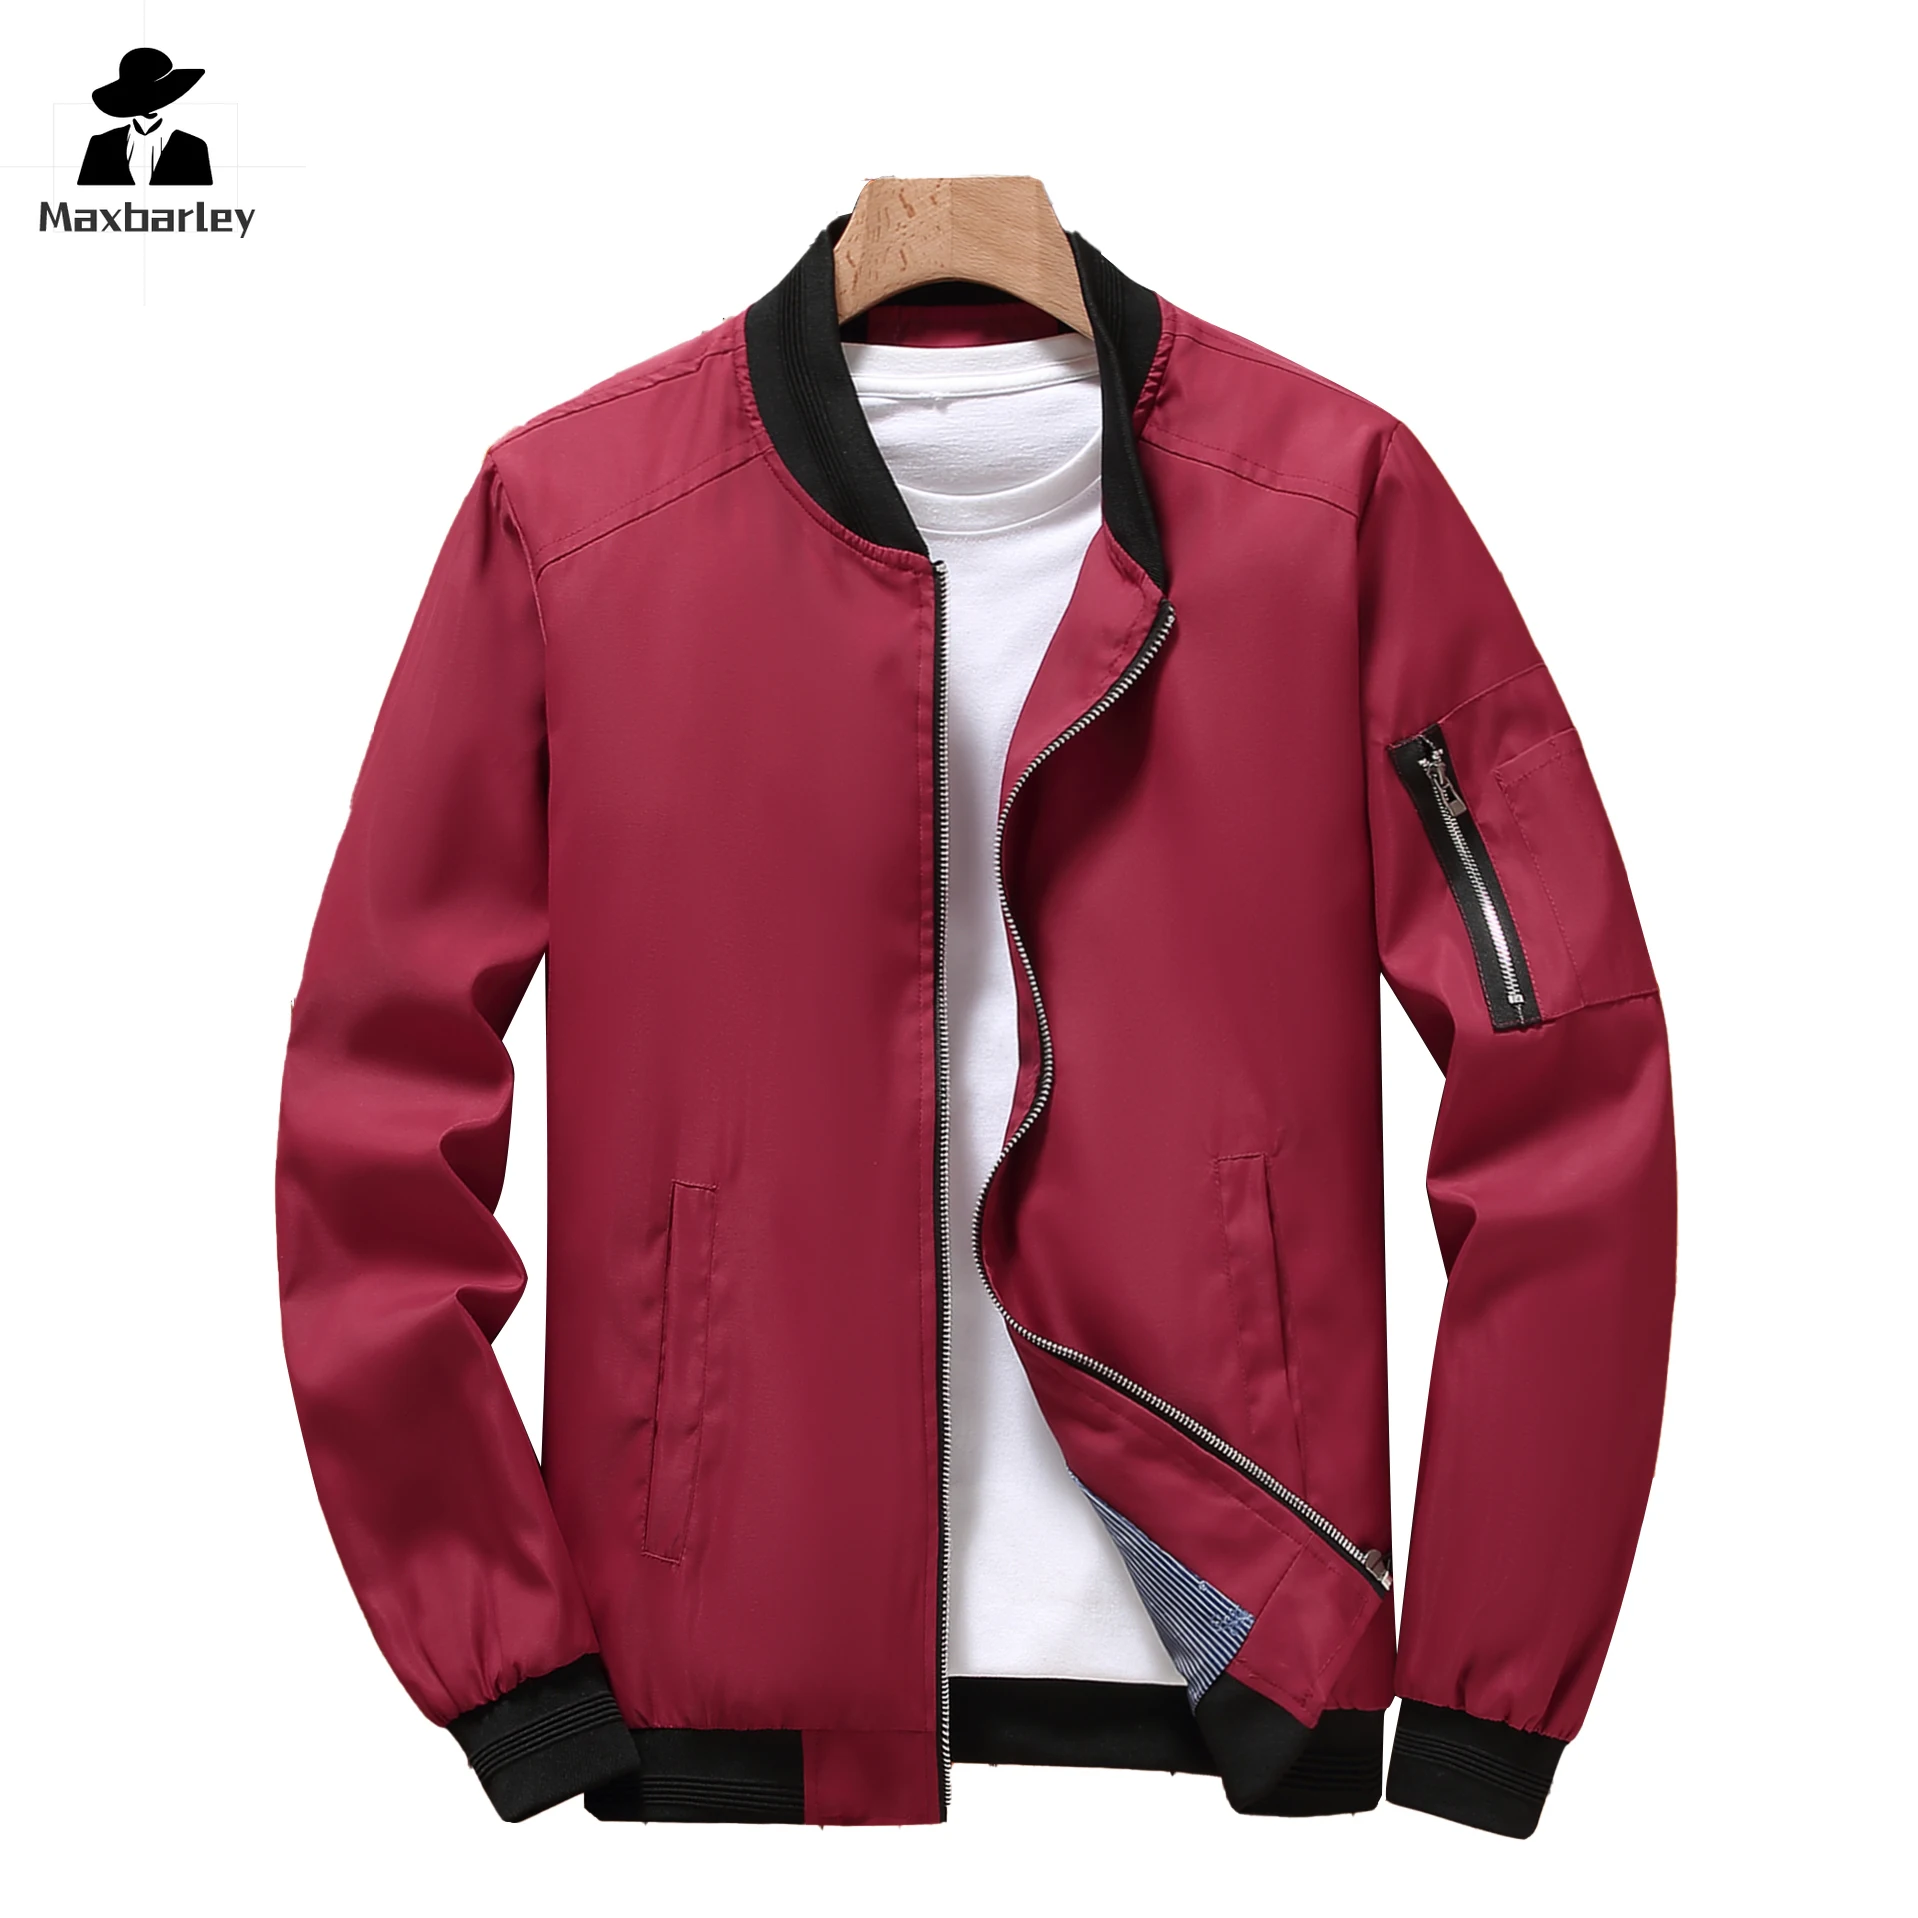 M-6XL Autumn Jacket Men's Thin Baseball Uniform Solid Color Windproof Cycling Coat plus size Loose MA-1 Bomber Jacket Men women touch screen gloves fashion mittens autumn winter warm thin cashmere solid cycling drive suede fabric elegant windproof